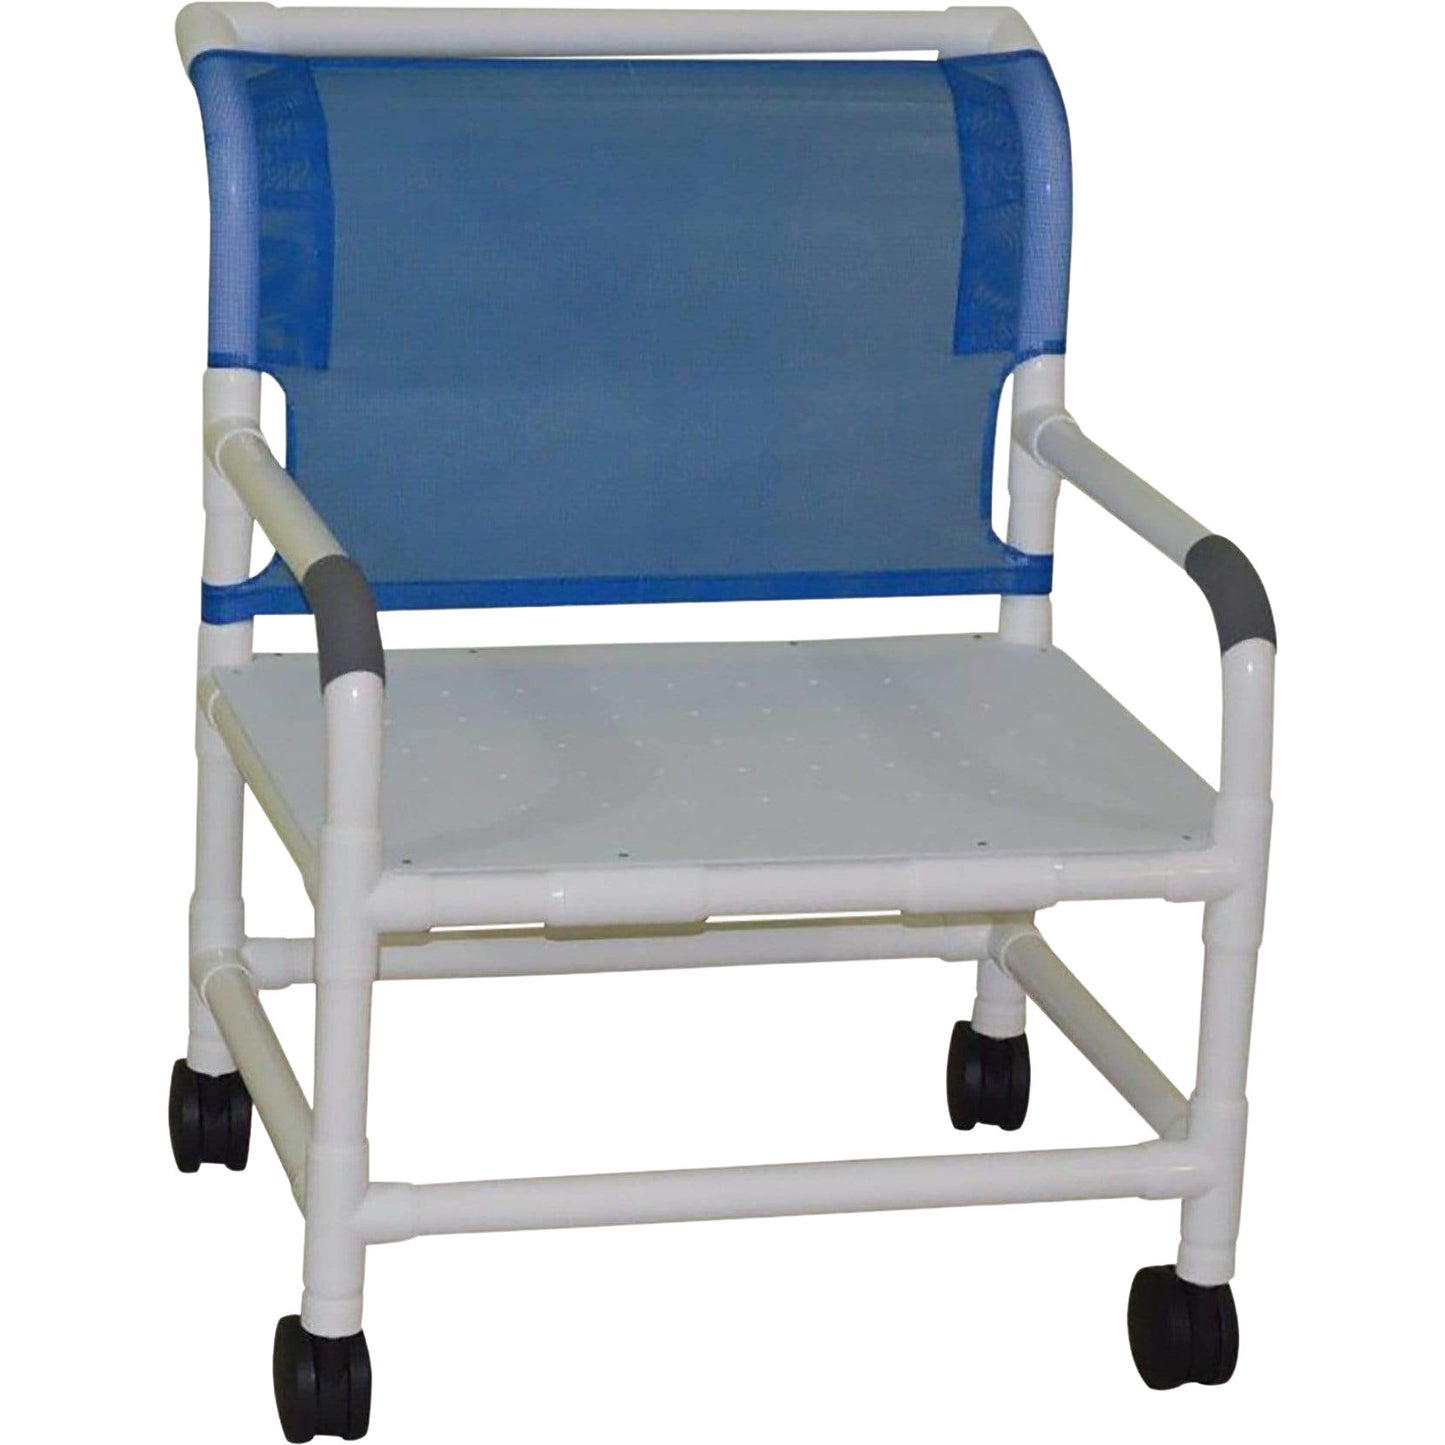 ConvaQuip Shower Chairs - PVC Model 126-5-WB-F Bariatric Shower Chair With Flat Seat